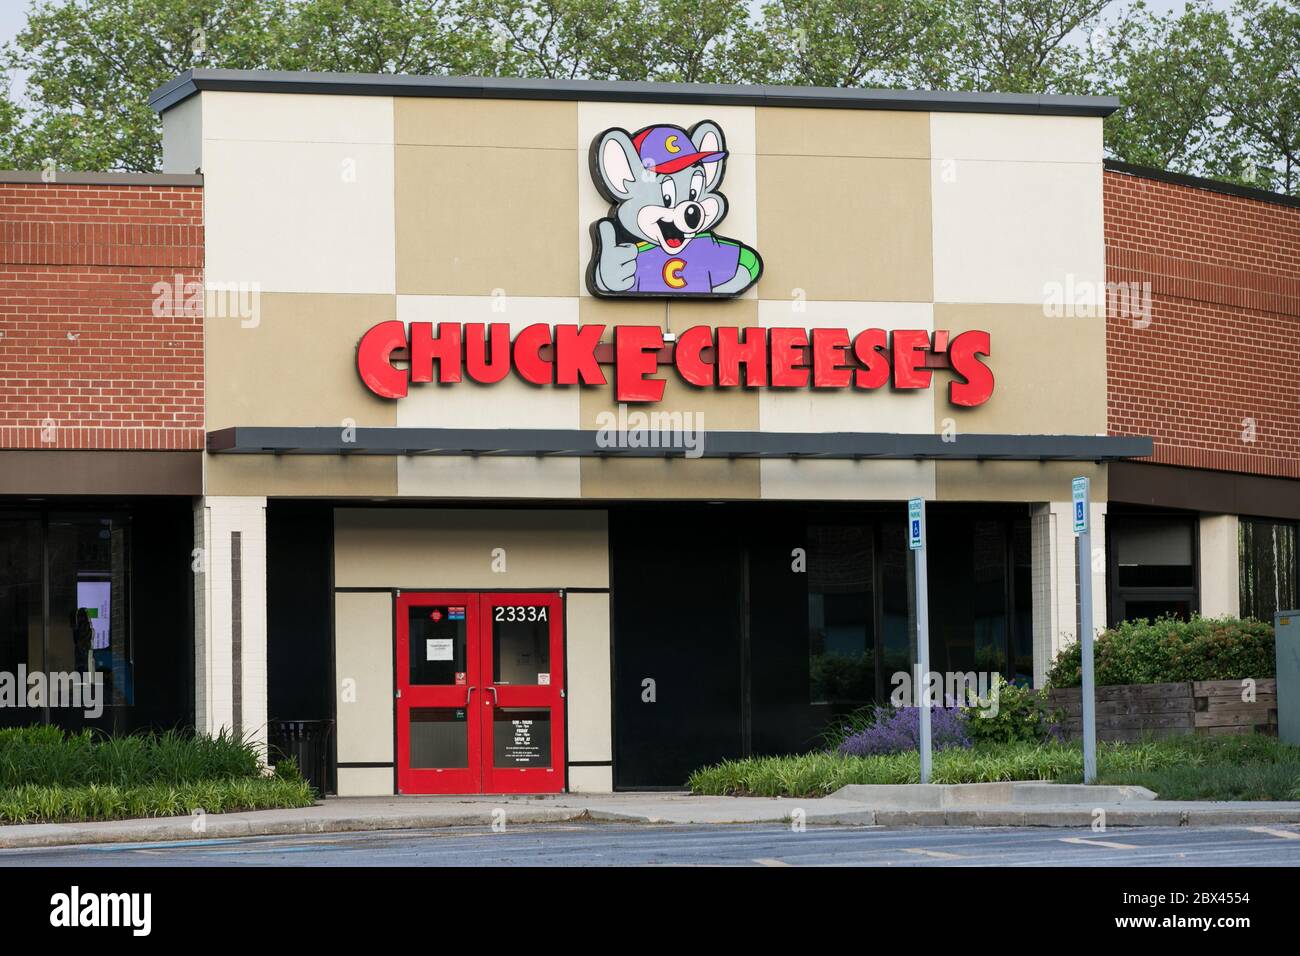 The Iconic Chuck E. Cheese Logo and Branding